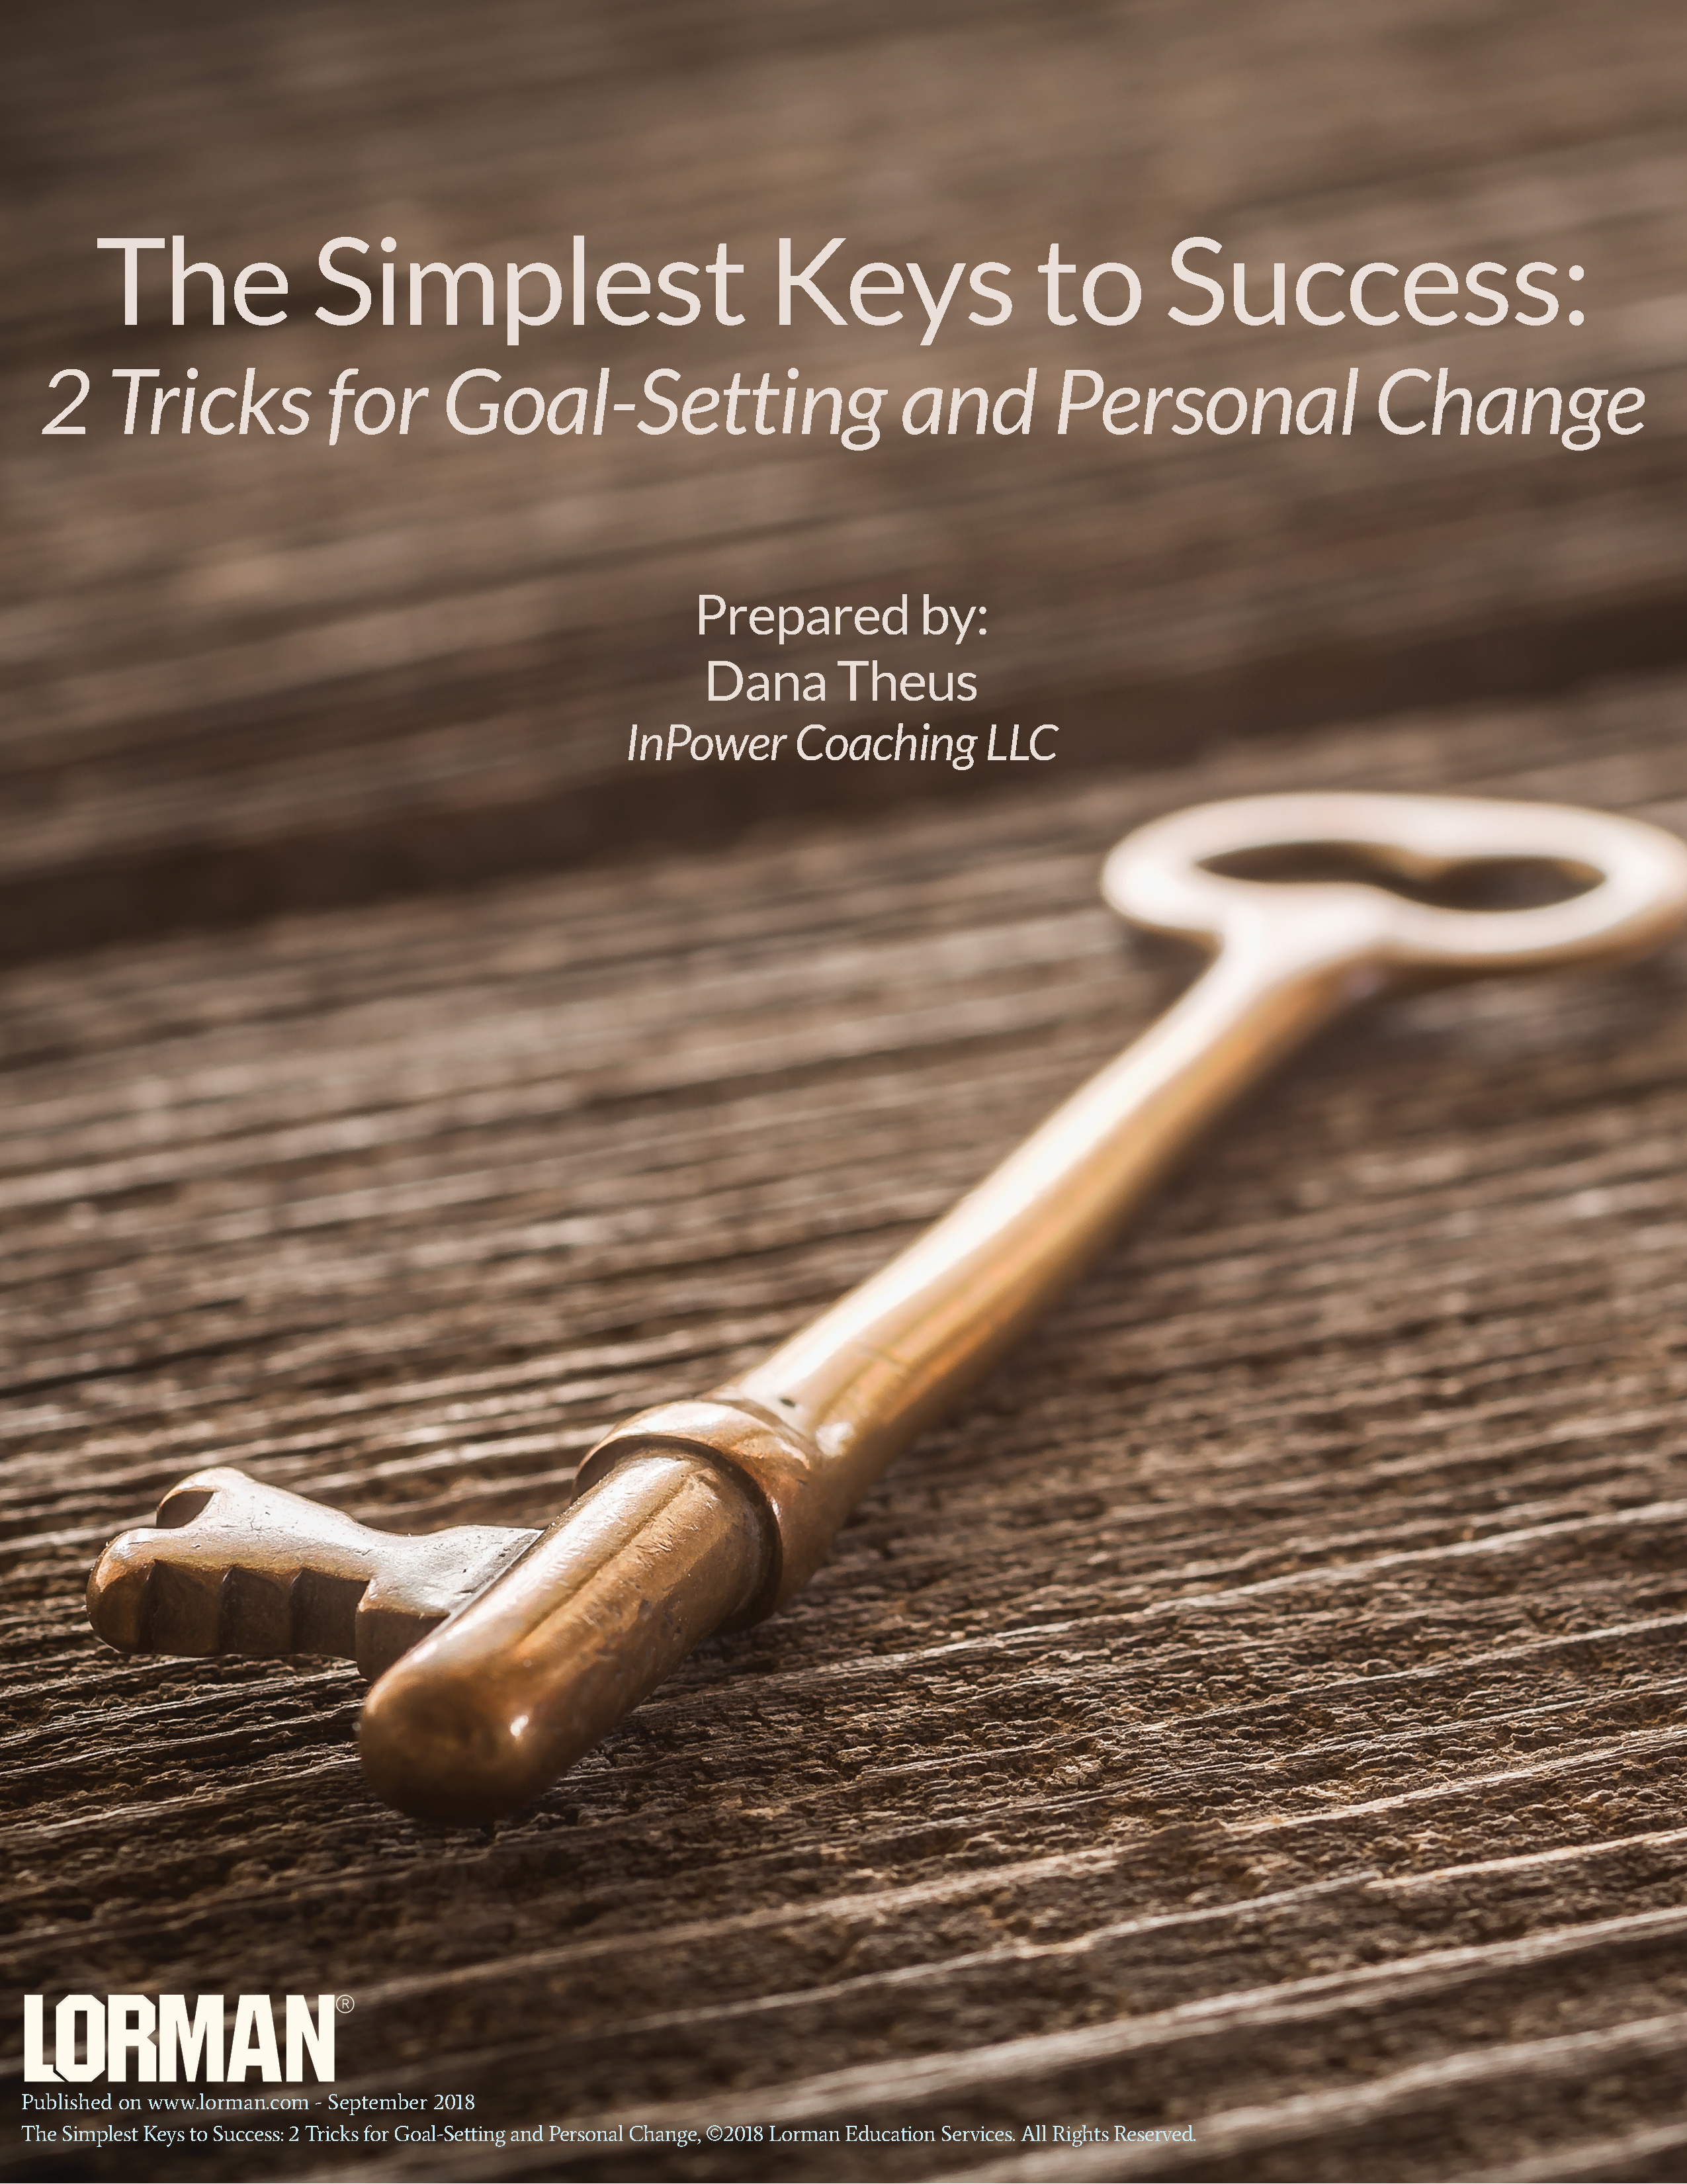 The Simplest Keys to Success: 2 Tricks for Goal-Setting and Personal Change